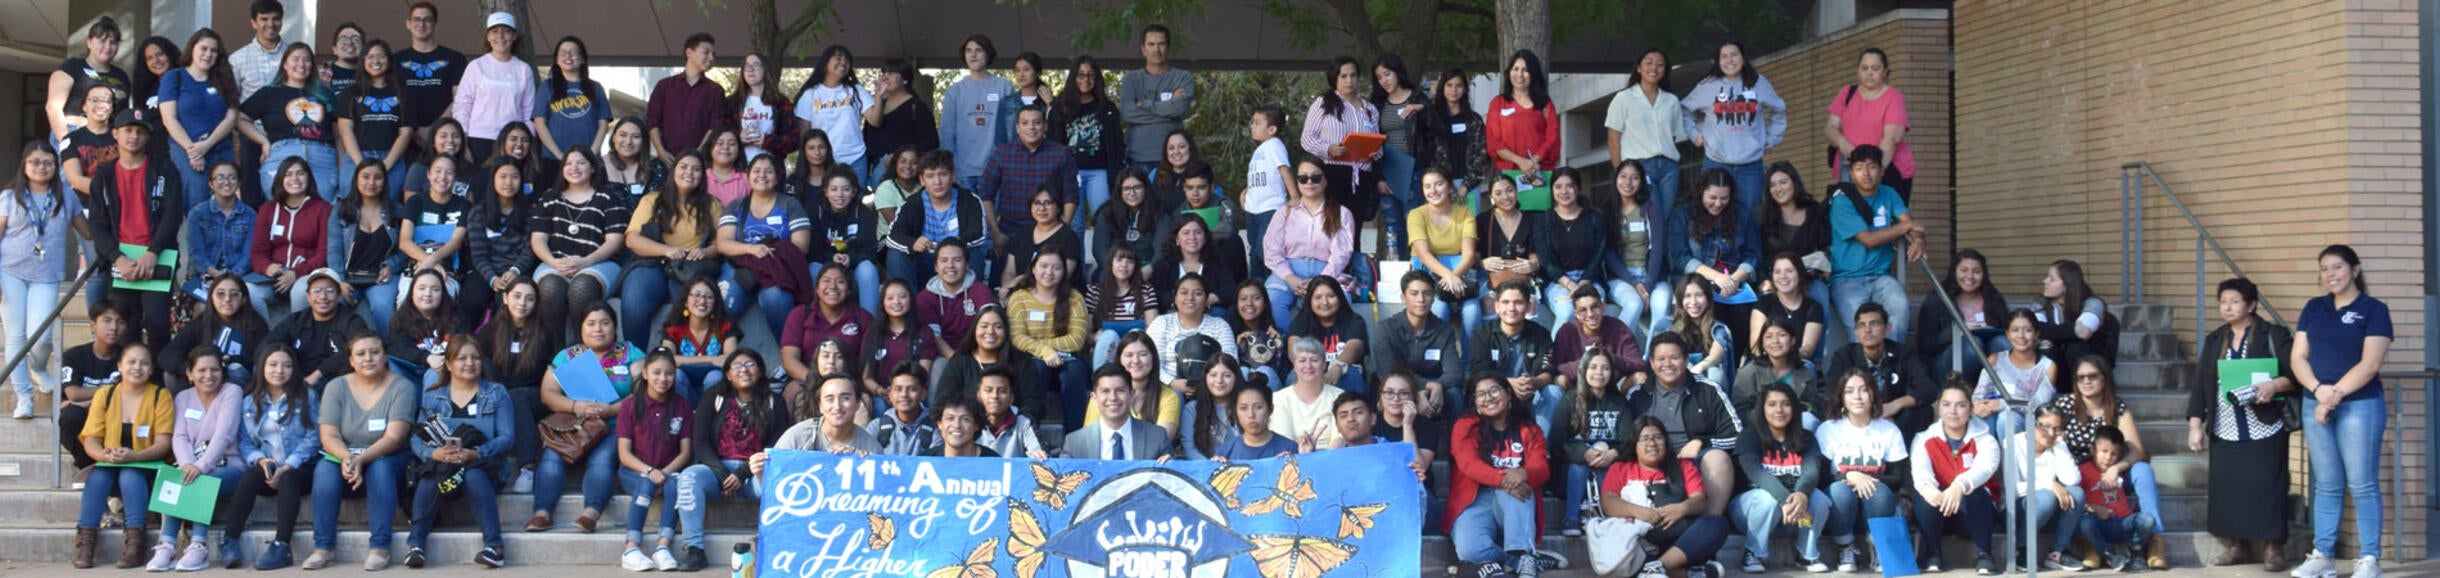 A large group of student gather for a photo on the UC Riverside campus